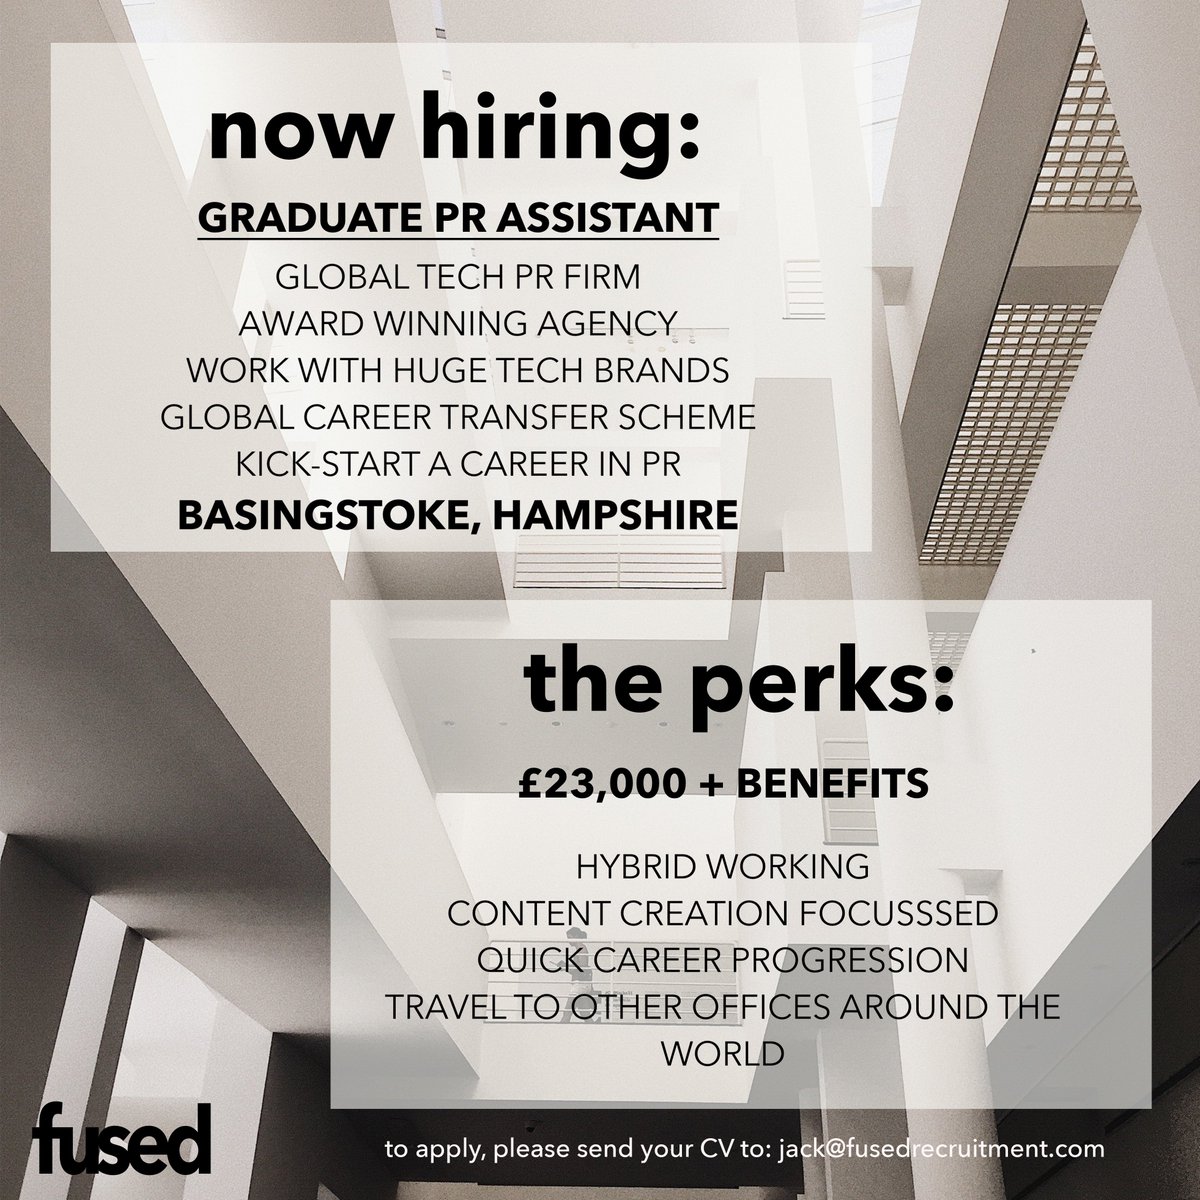 If you're a recent Graduate looking for a PR role to kick-start a career in Public Relations with - apply here or drop us a message! #gradjobs #prjobs #techpr #hiring #basingstoke #graduatejobs #graduateprjobs